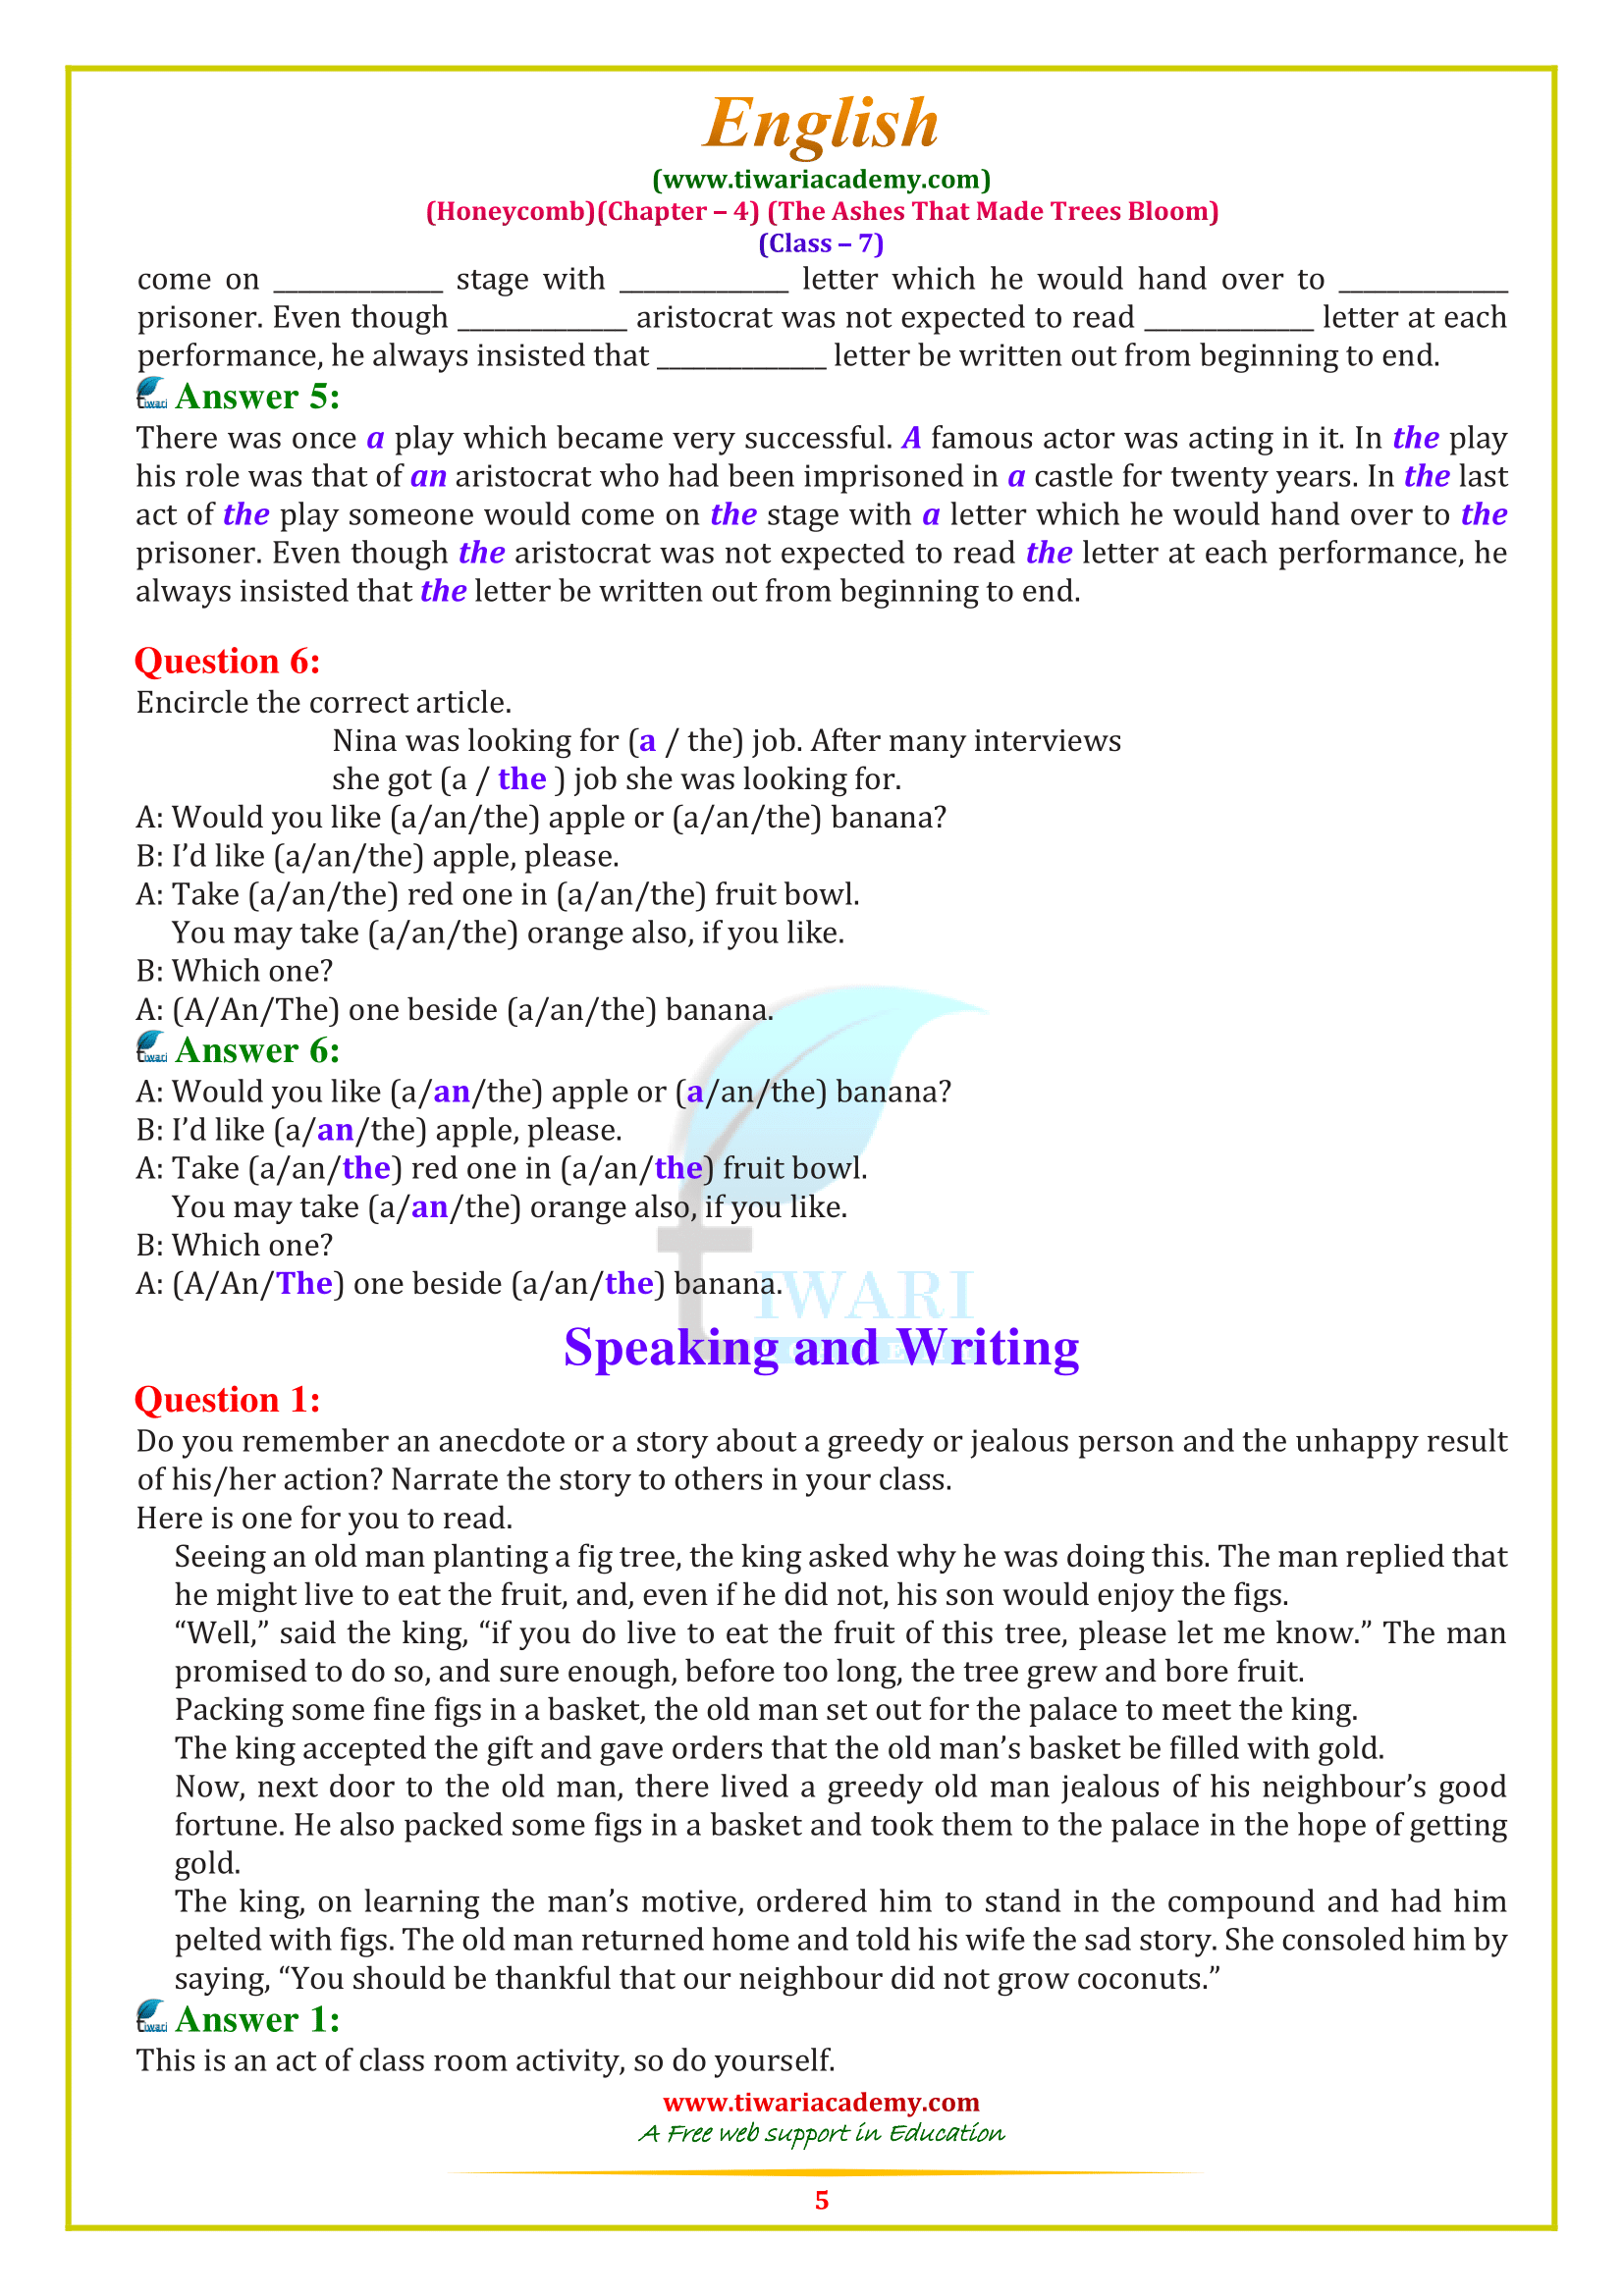 7 English chapter 4 chapter end exercises